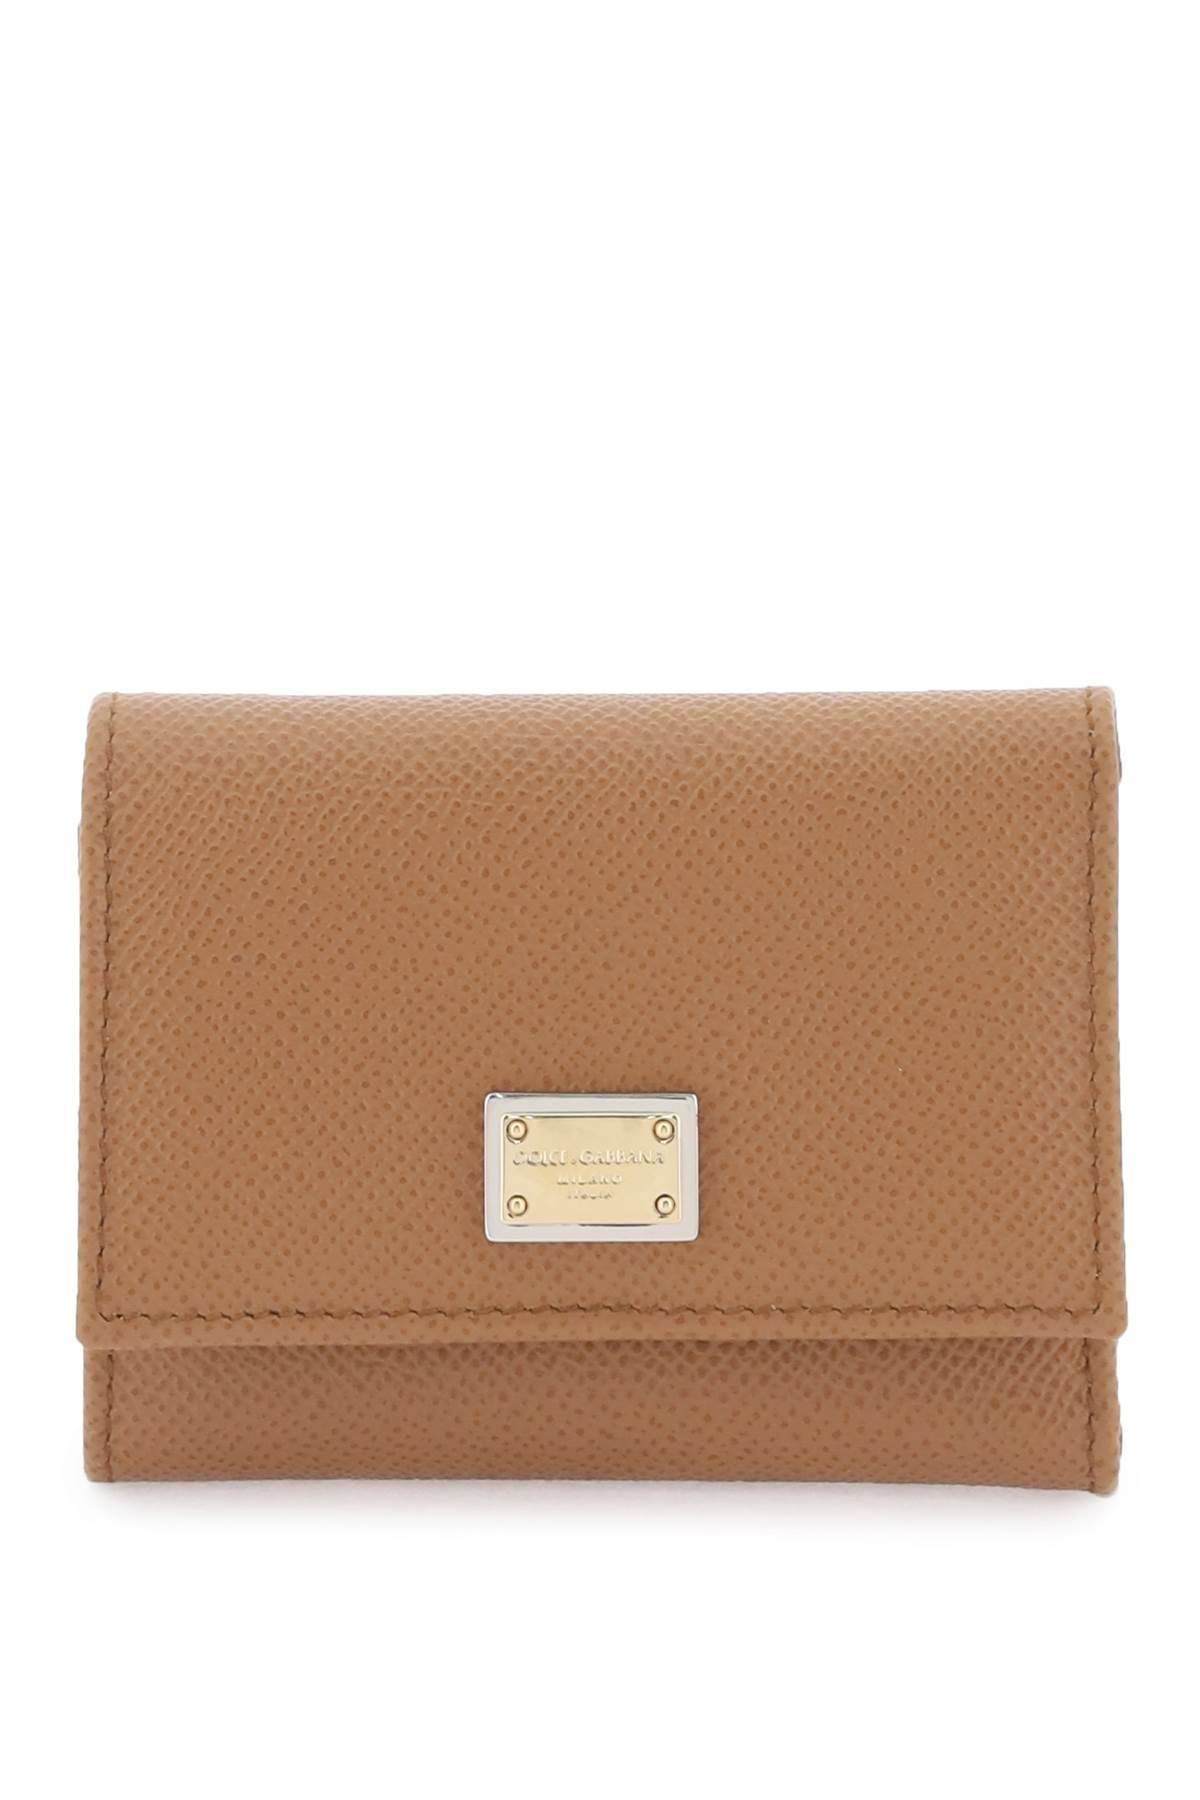 Dolce & Gabbana French Flap Wallet In Brown